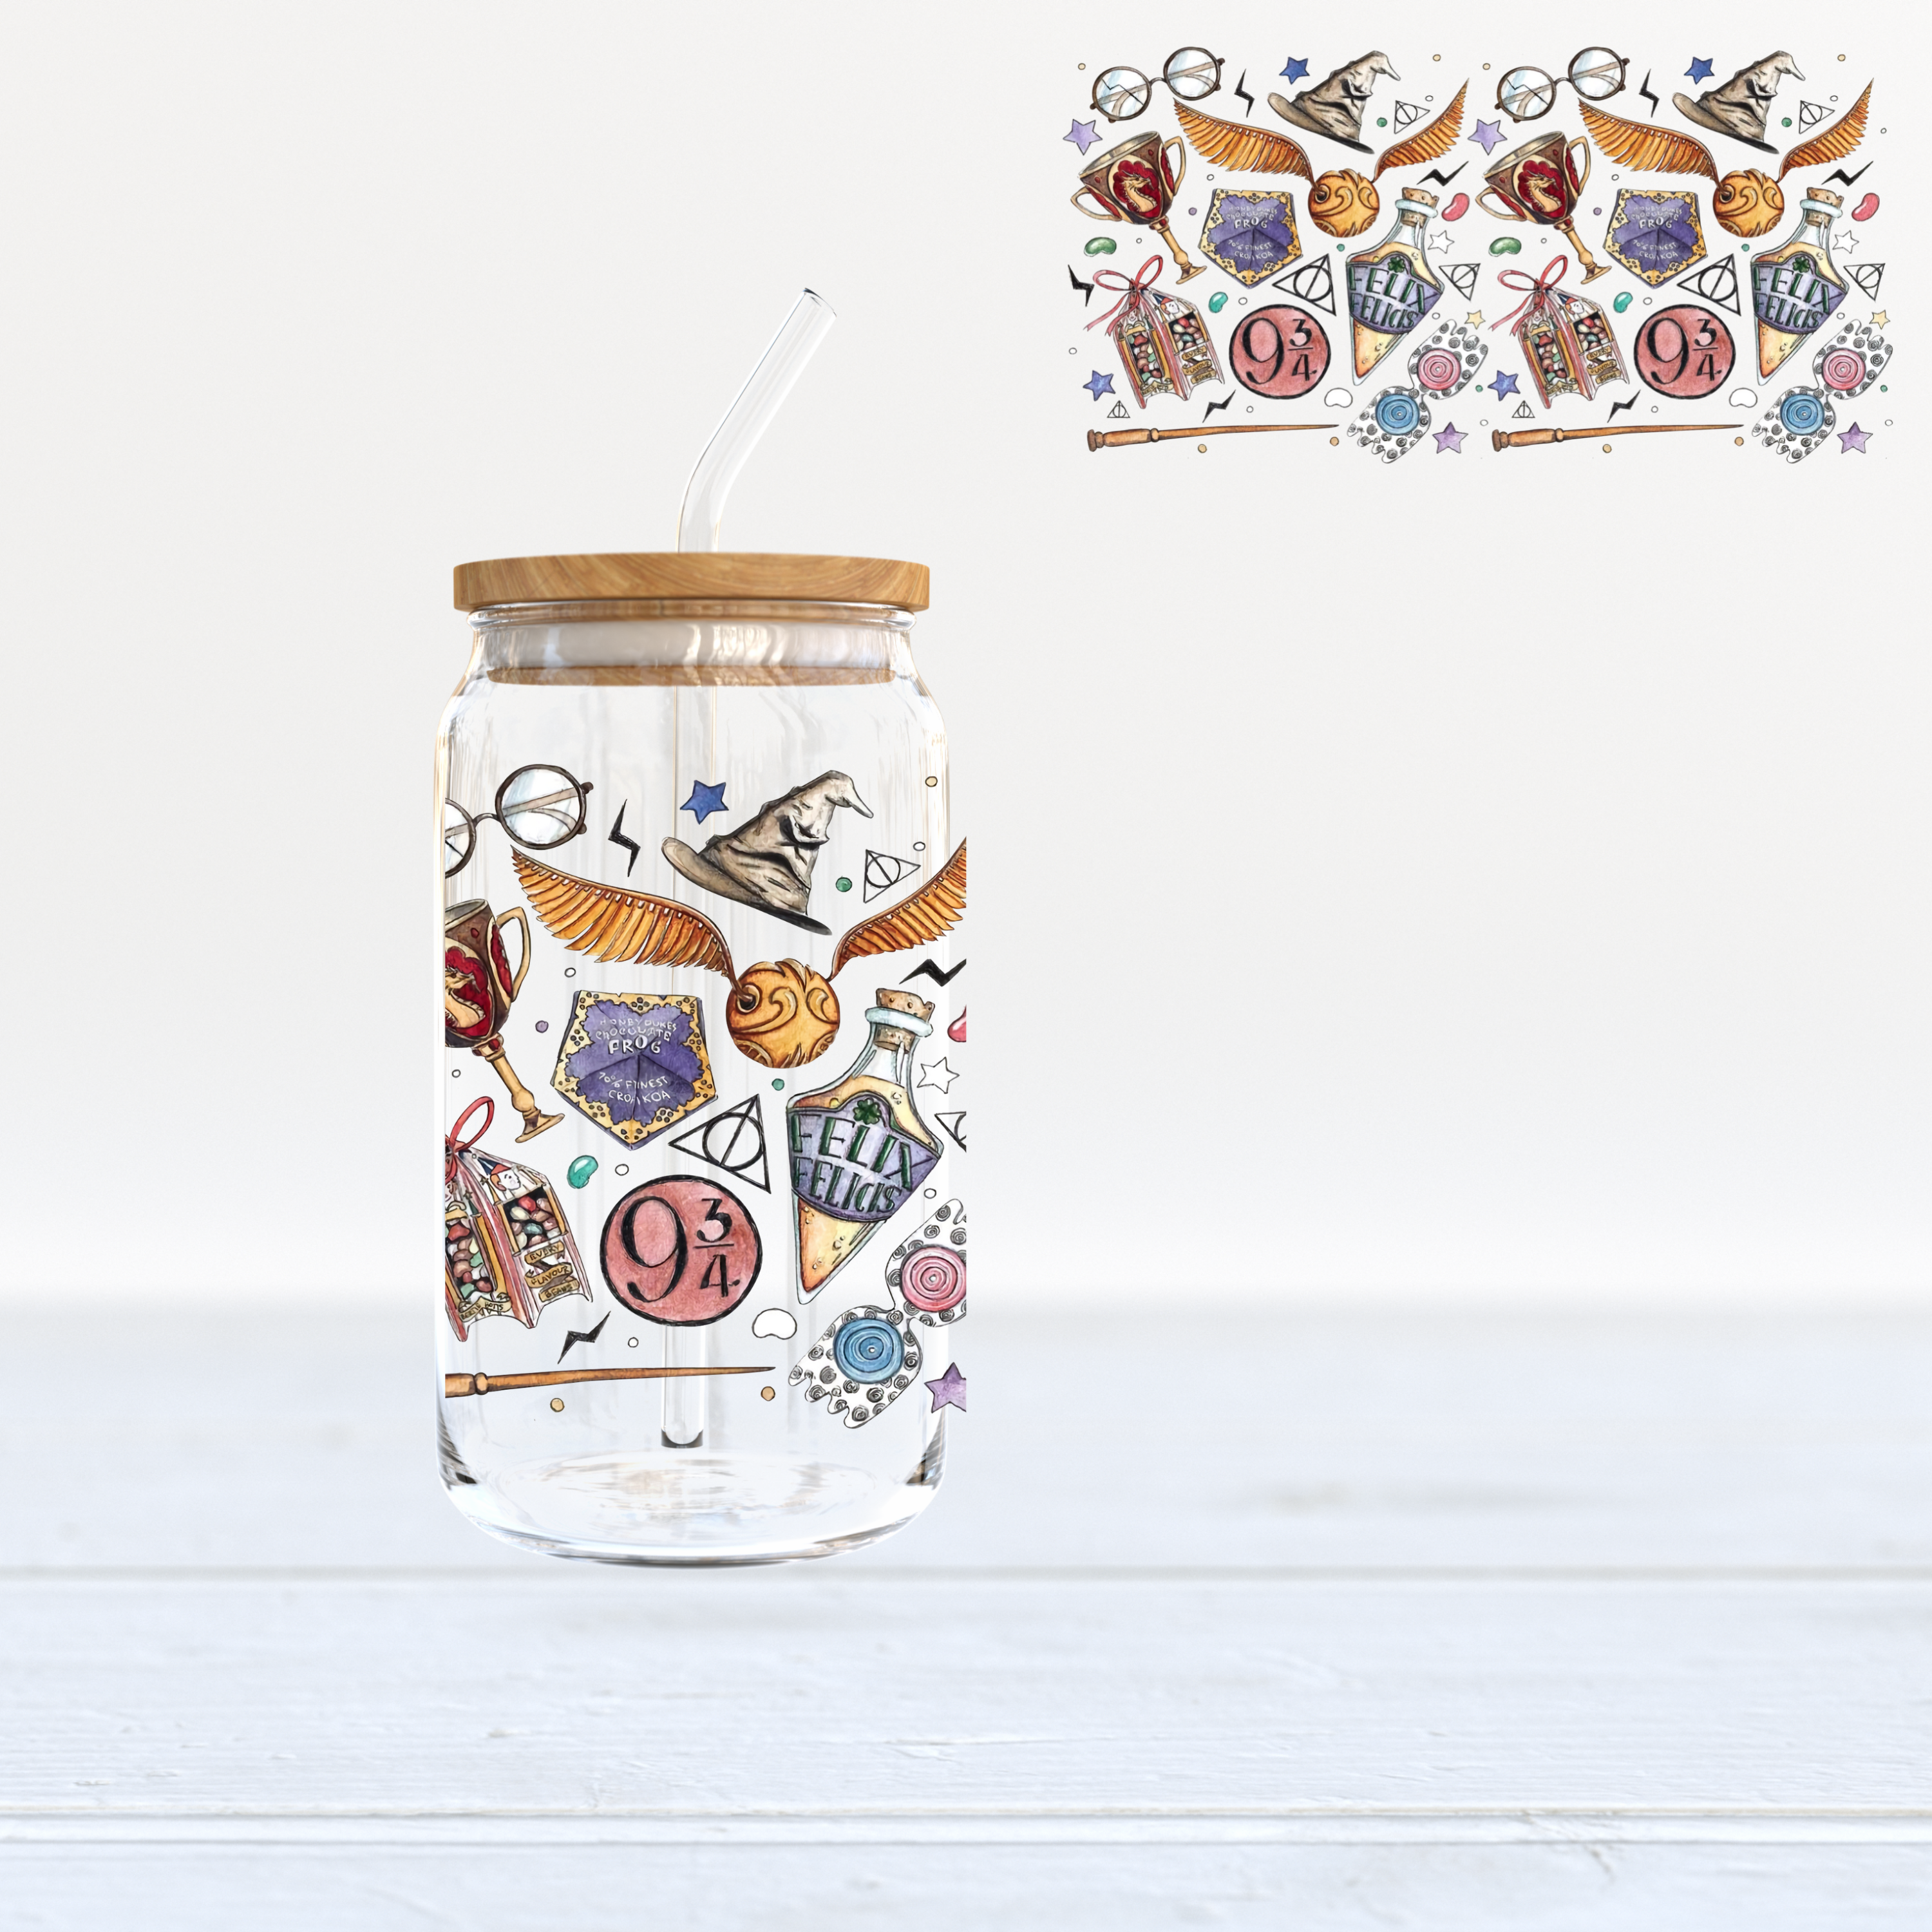 Marshmallows - UV DTF 16 oz Cup Wrap – Curly Vine Design Co